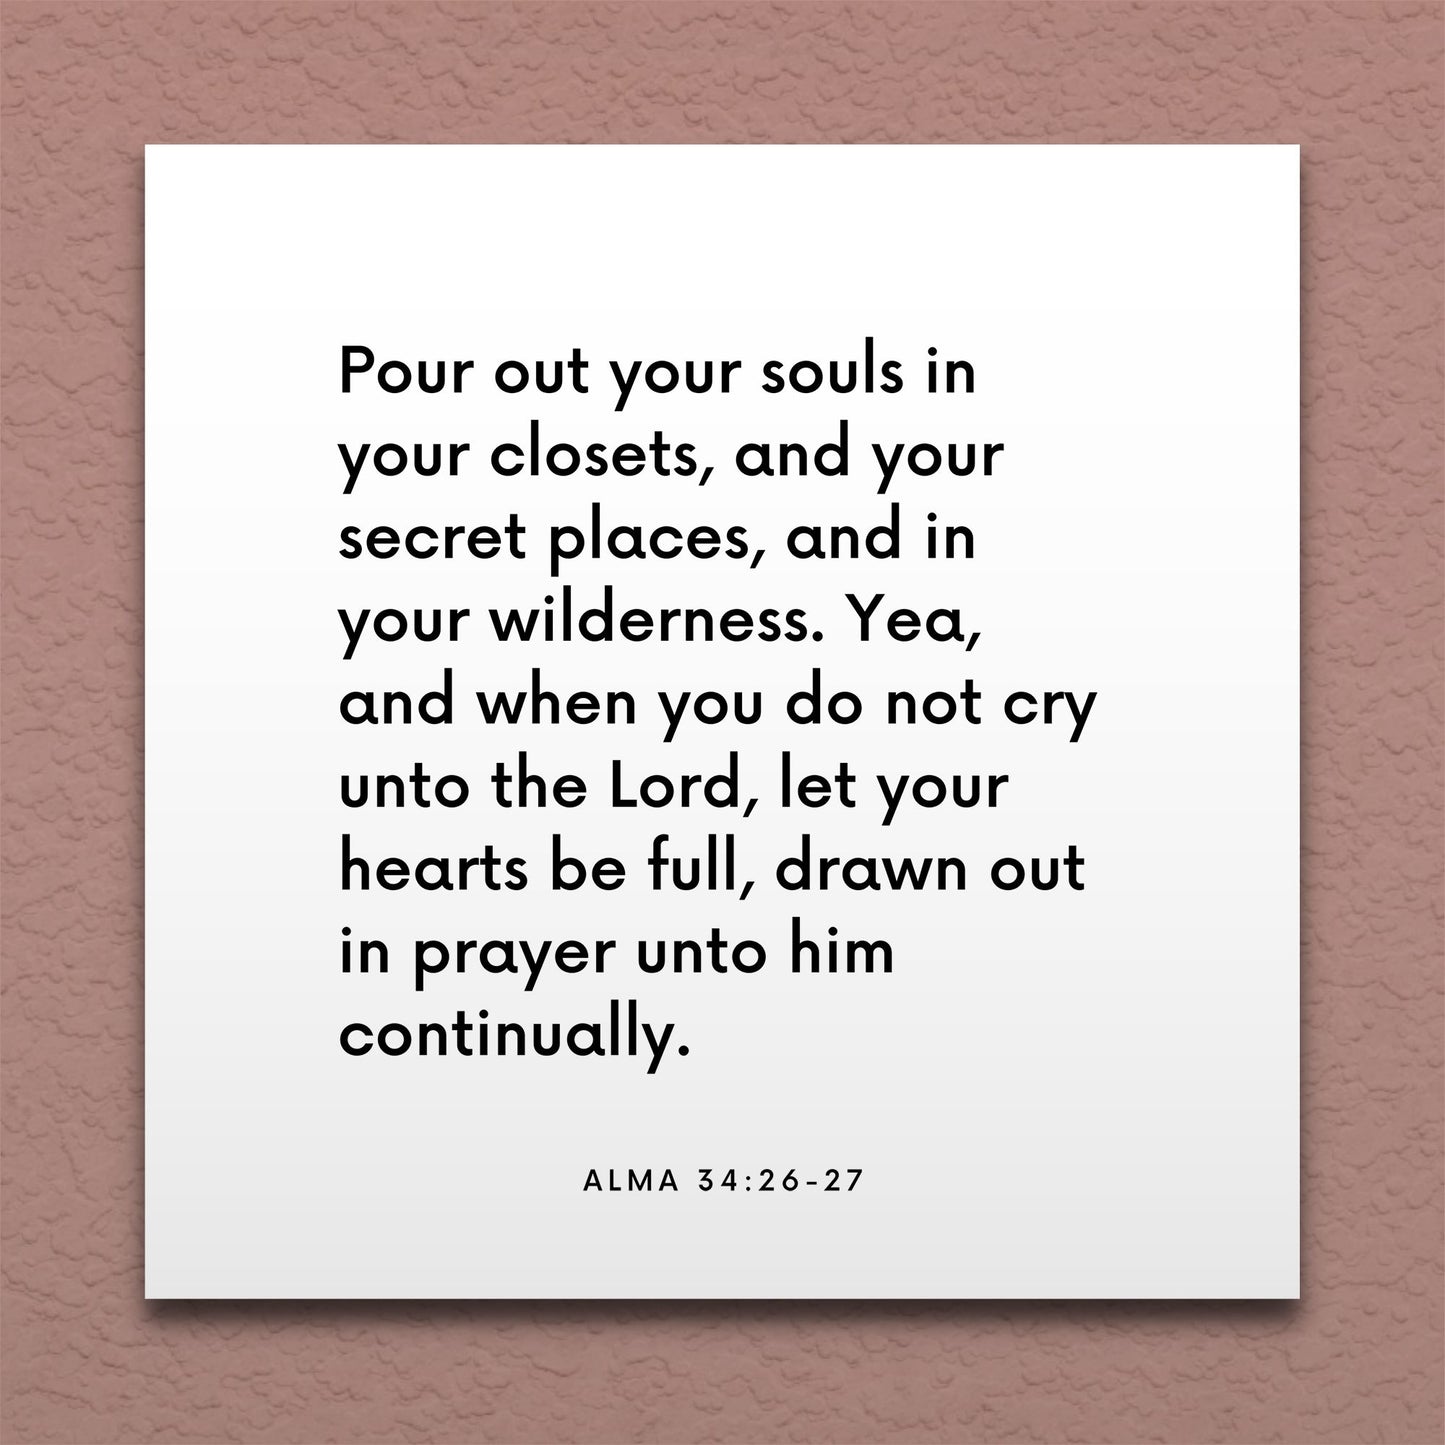 Wall-mounted scripture tile for Alma 34:26-27 - "Pour out your souls in your closets"